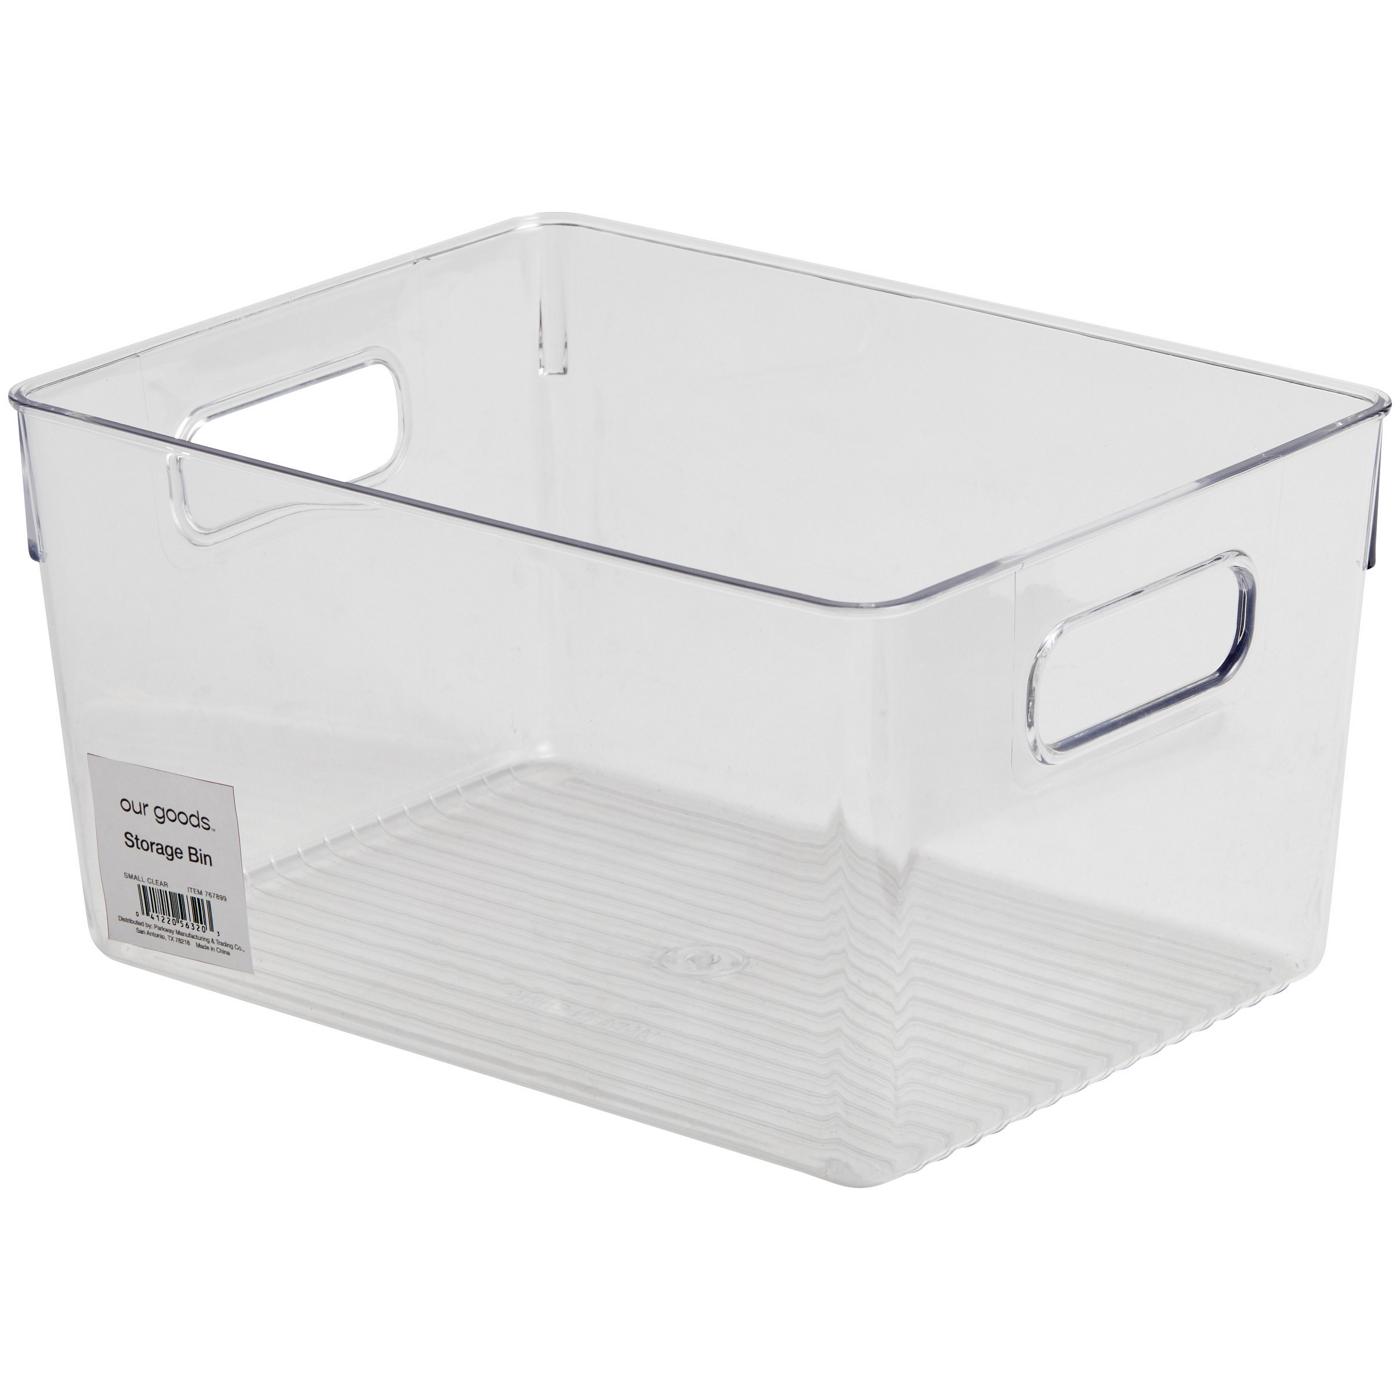 our goods Rectangle Storage Bin - Clear; image 1 of 3